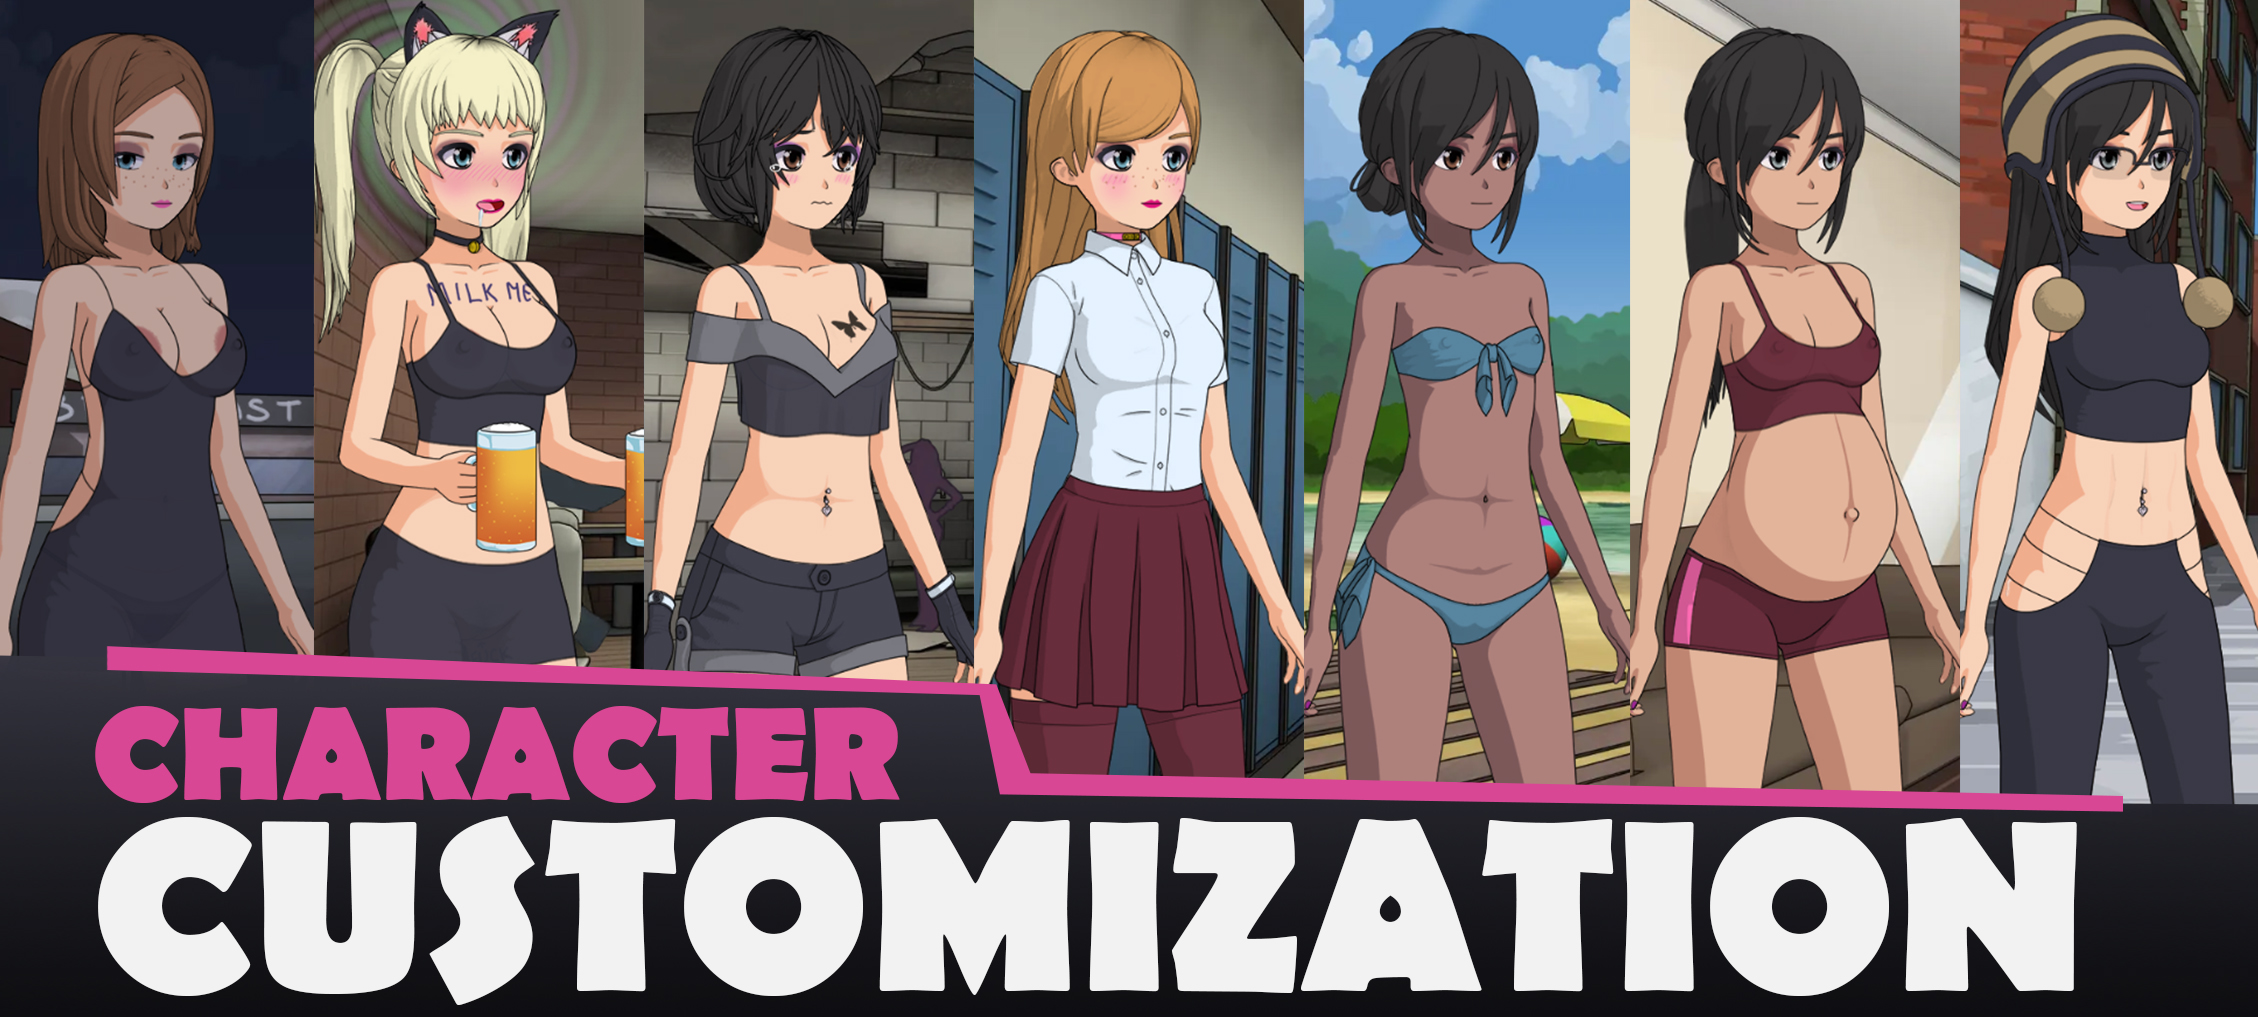 Customizable character porn game